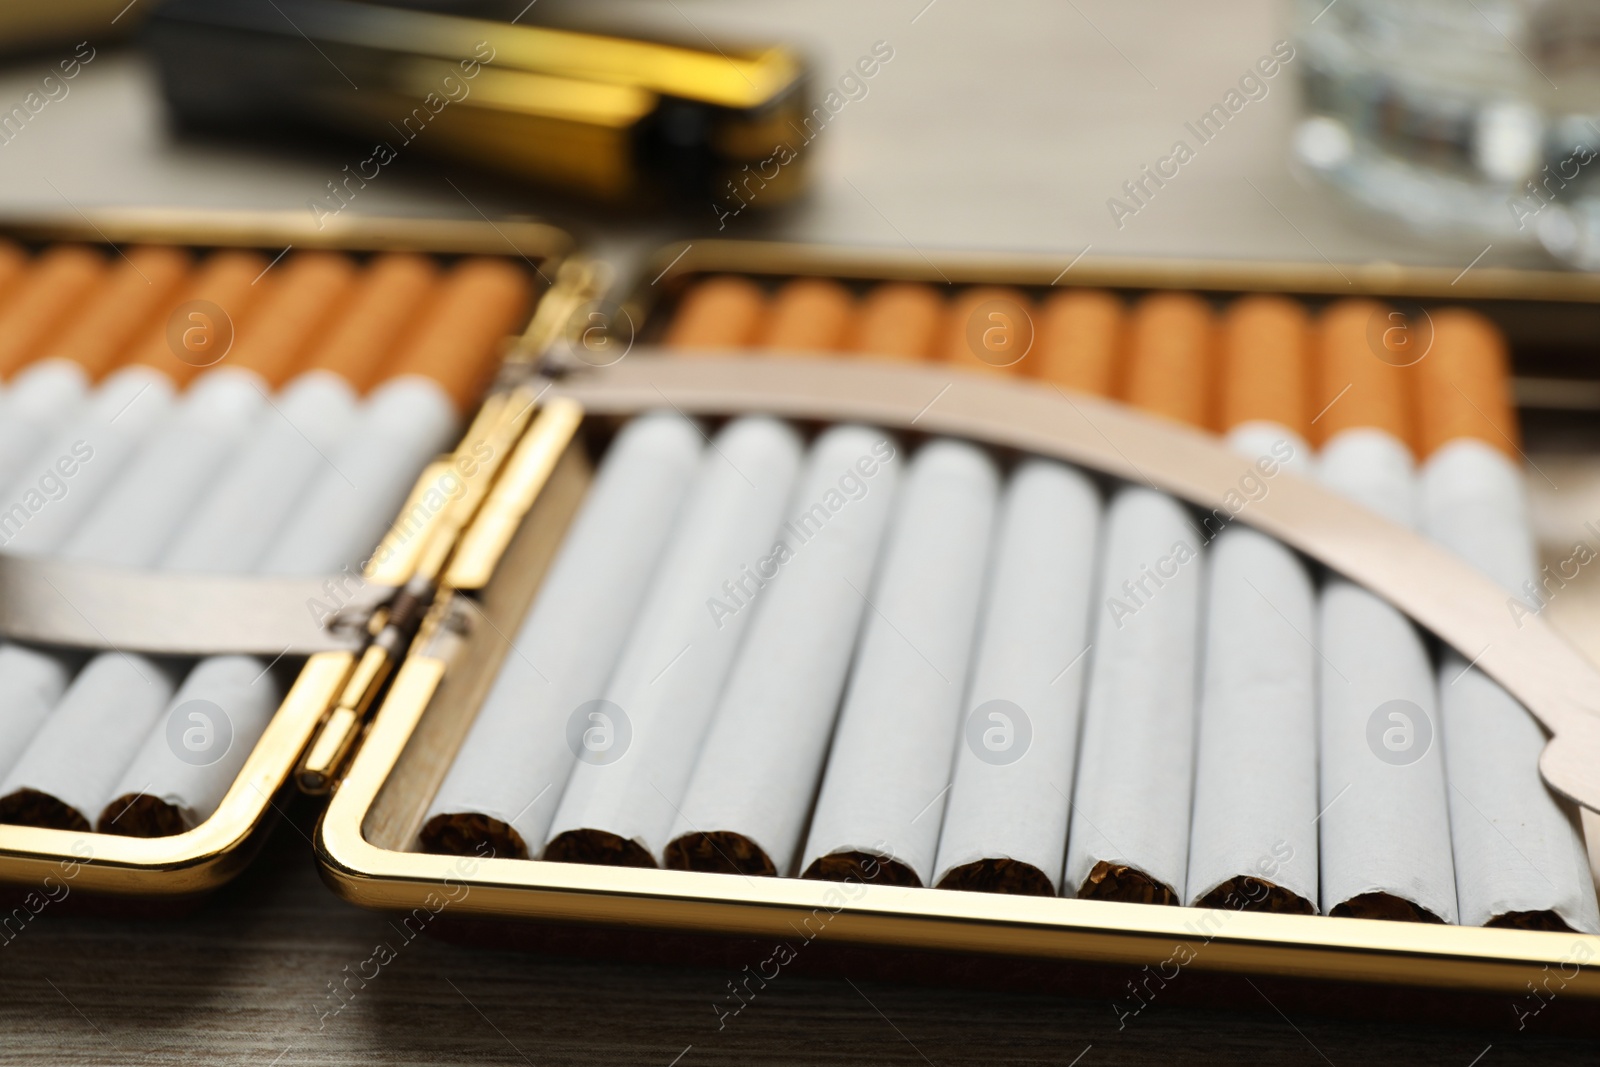 Photo of Open case with tobacco filter cigarettes on wooden table, closeup